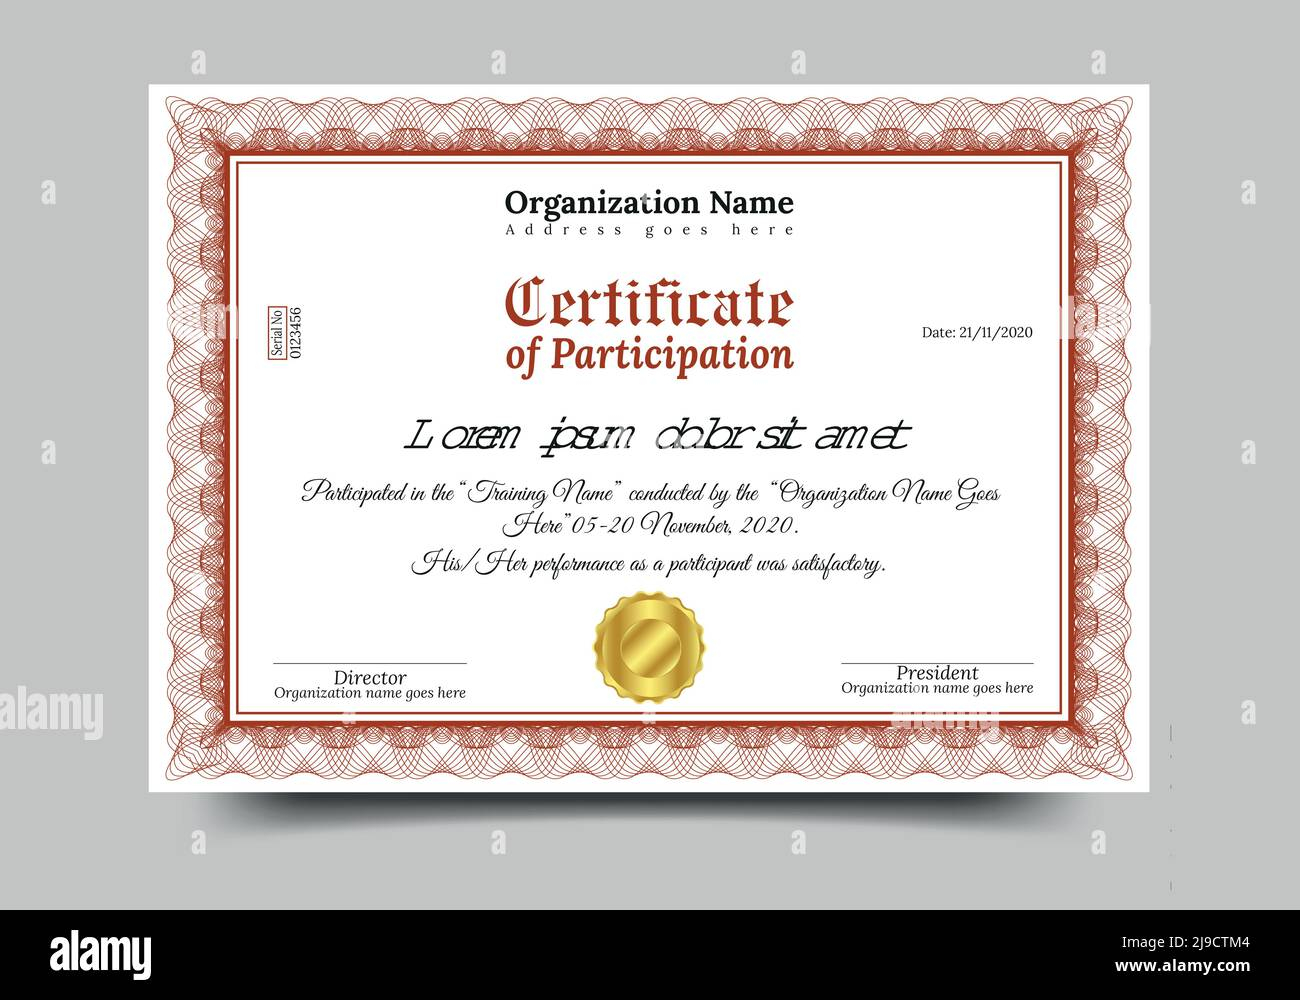 Certificate of participation Stock-Vektorgrafiken kaufen - Alamy Pertaining To Templates For Certificates Of Participation